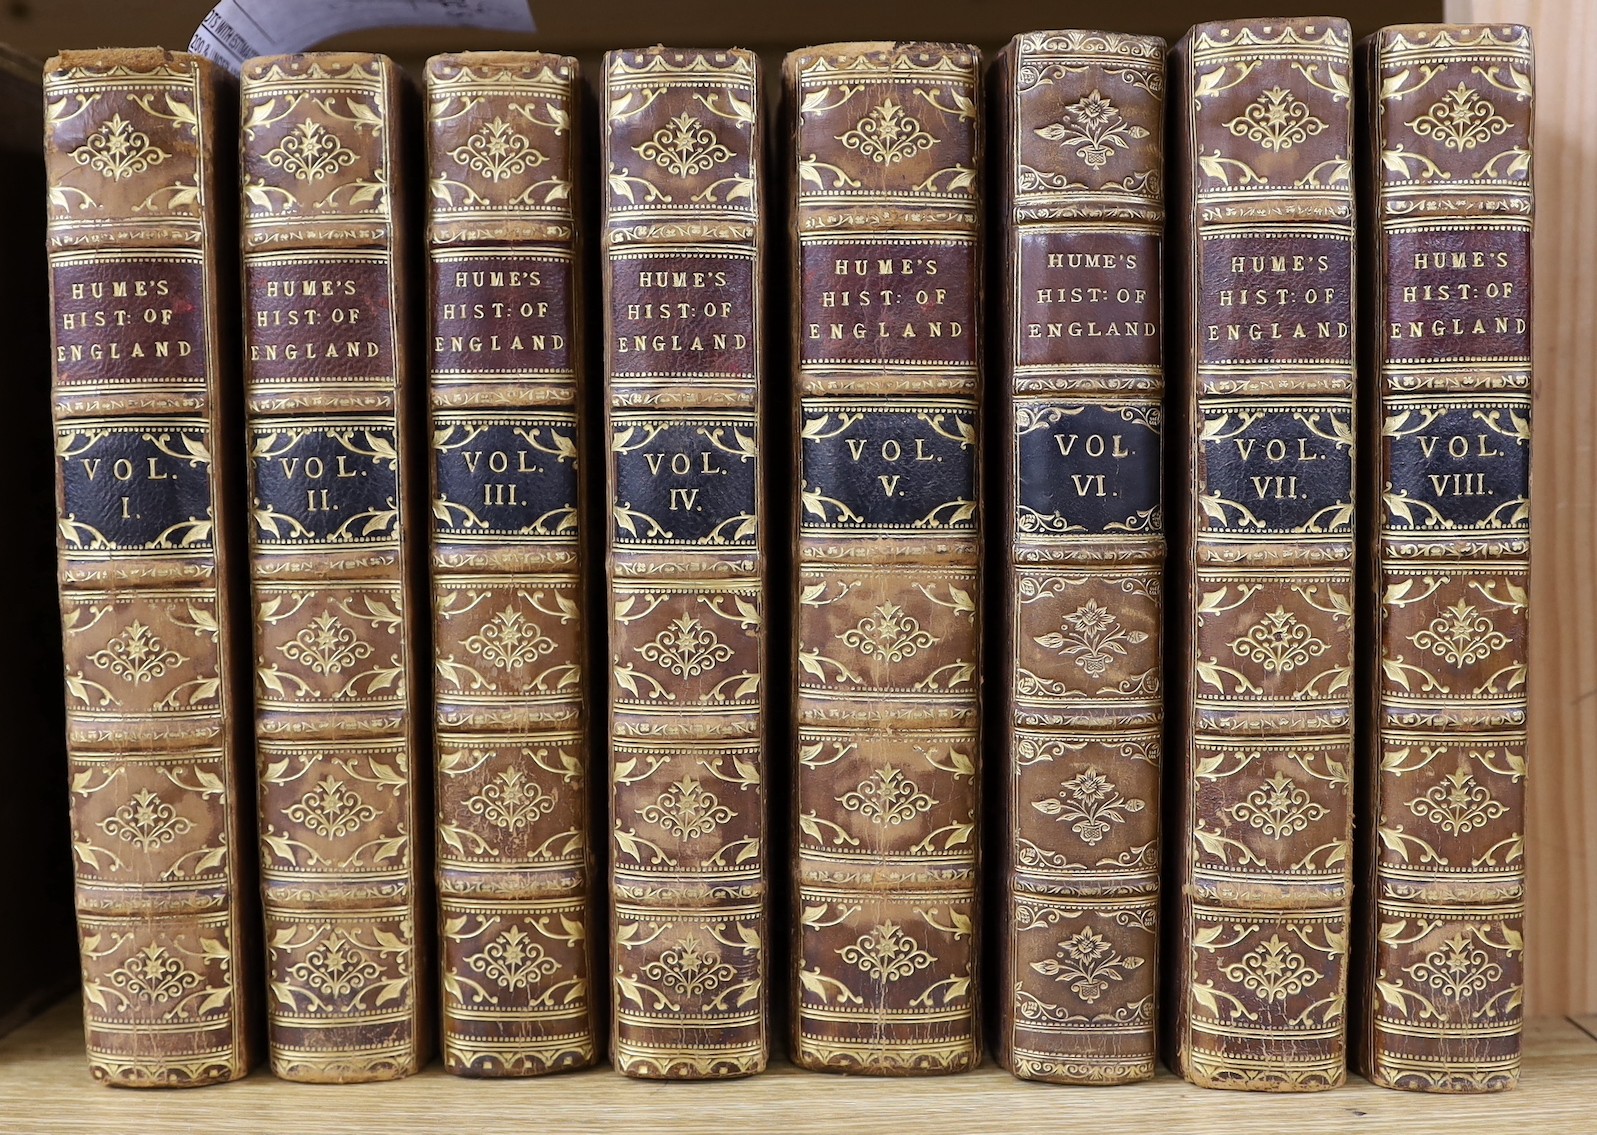 Hume, David - The History of England, from the Invasion of Julius Caesar to the Revolution in 1688, 8 vols, 8vo, calf, A. Millar, London, 1763